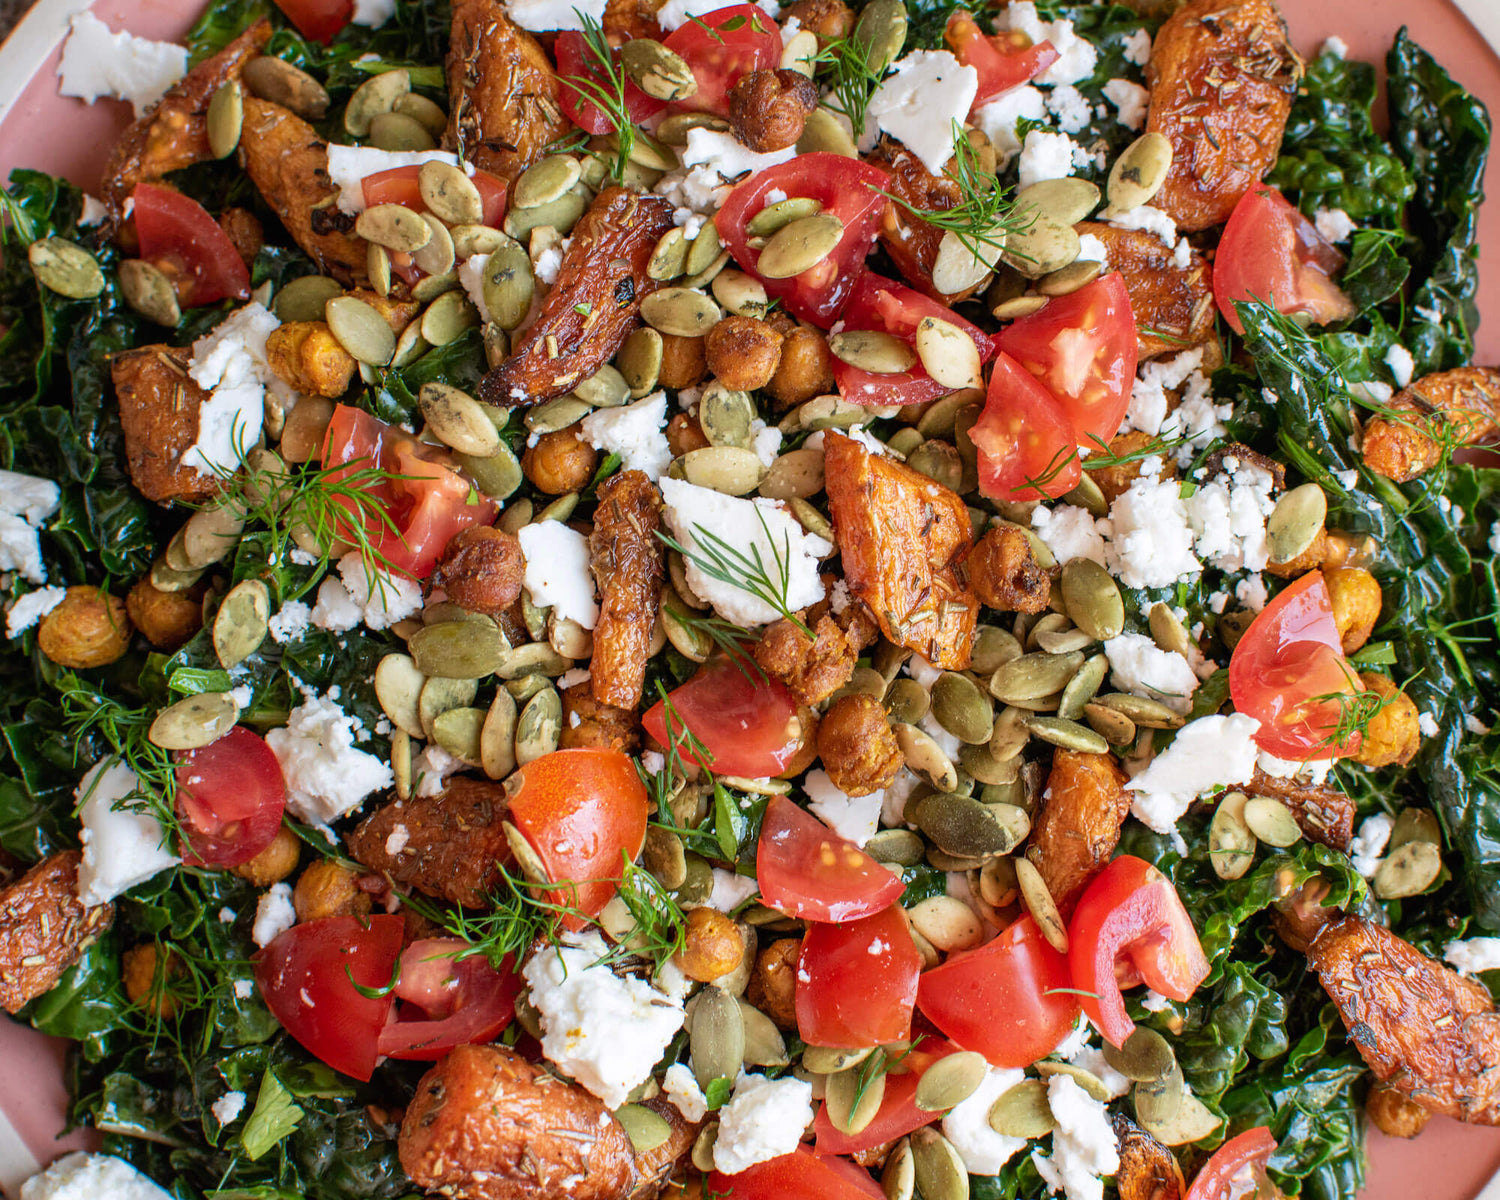 Herby Kale Salad with Go Raw Pumpkin Seeds